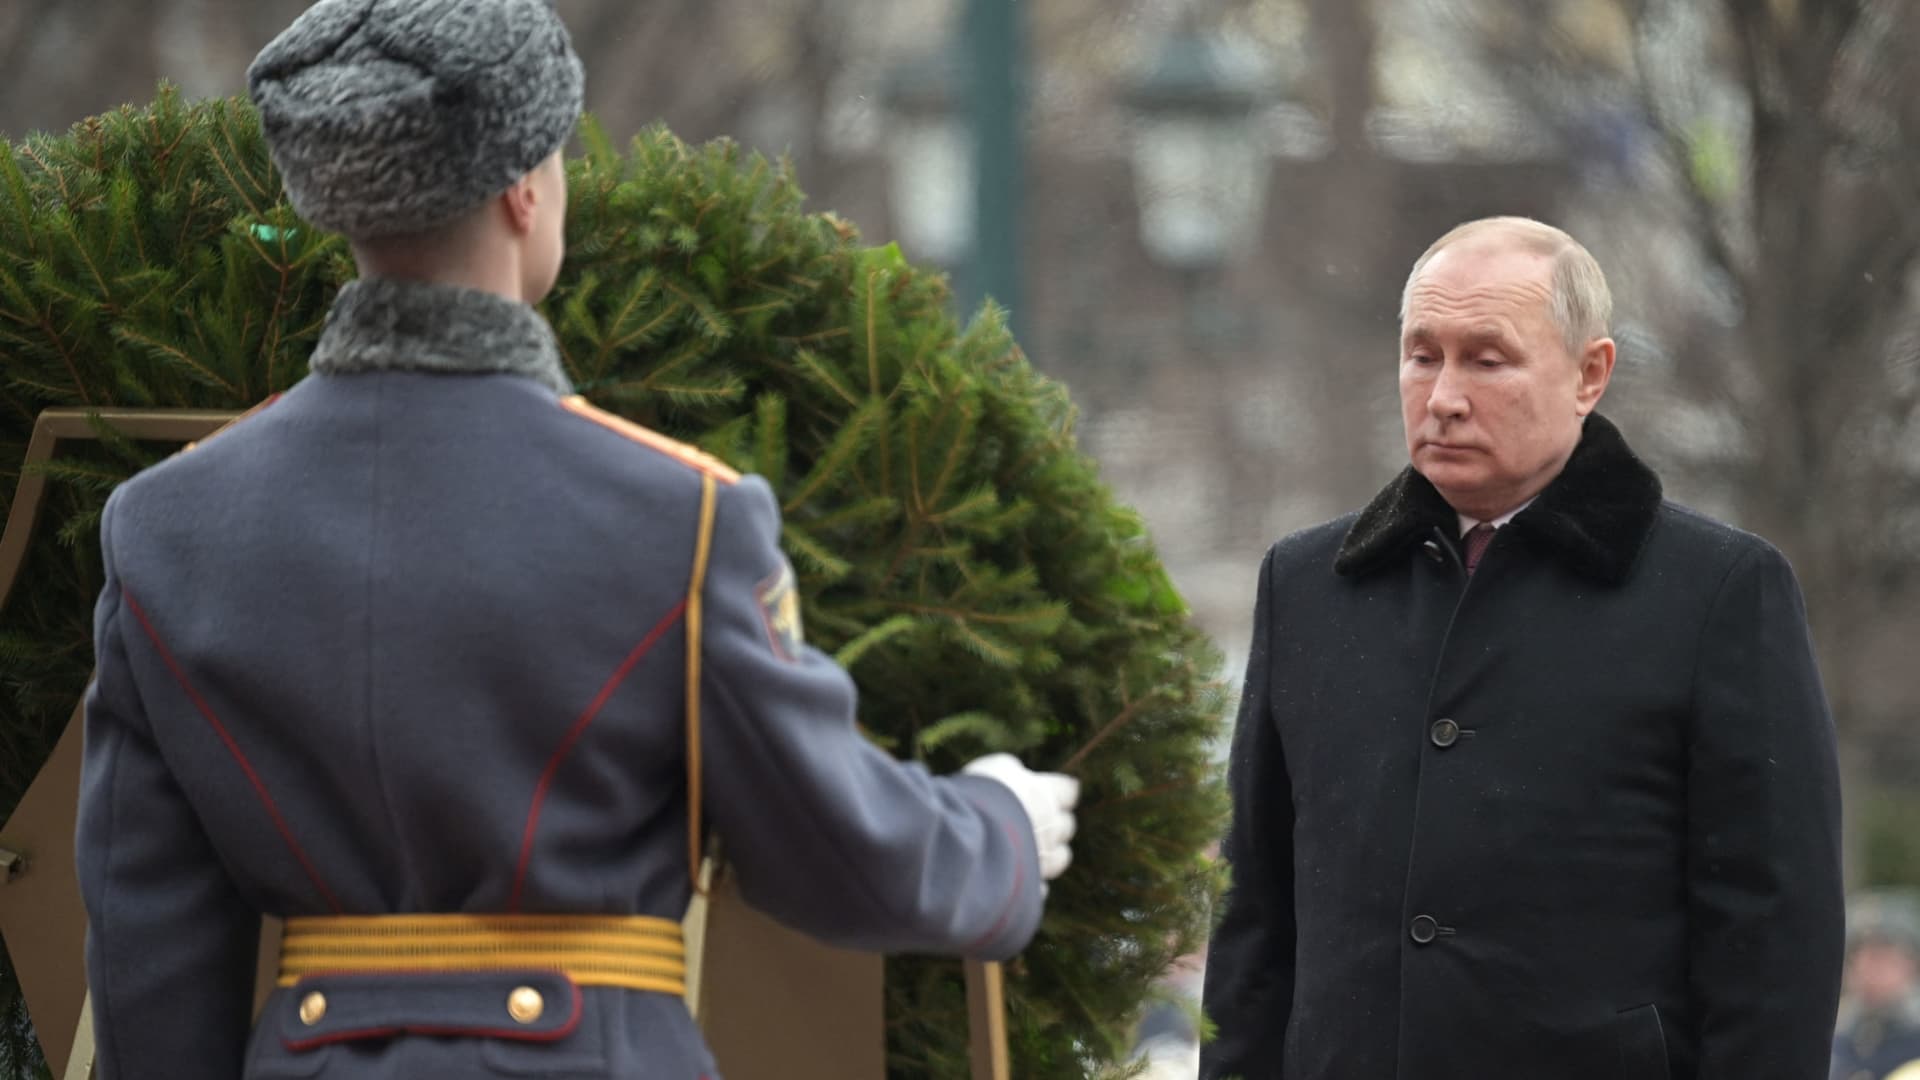 Russian President Vladimir Putin takes part in a wreath laying ceremony at the Tomb of the Unknown Soldier by the Kremlin Wall on the Defender of the Fatherland Day in Moscow, Russia February 23, 2022.